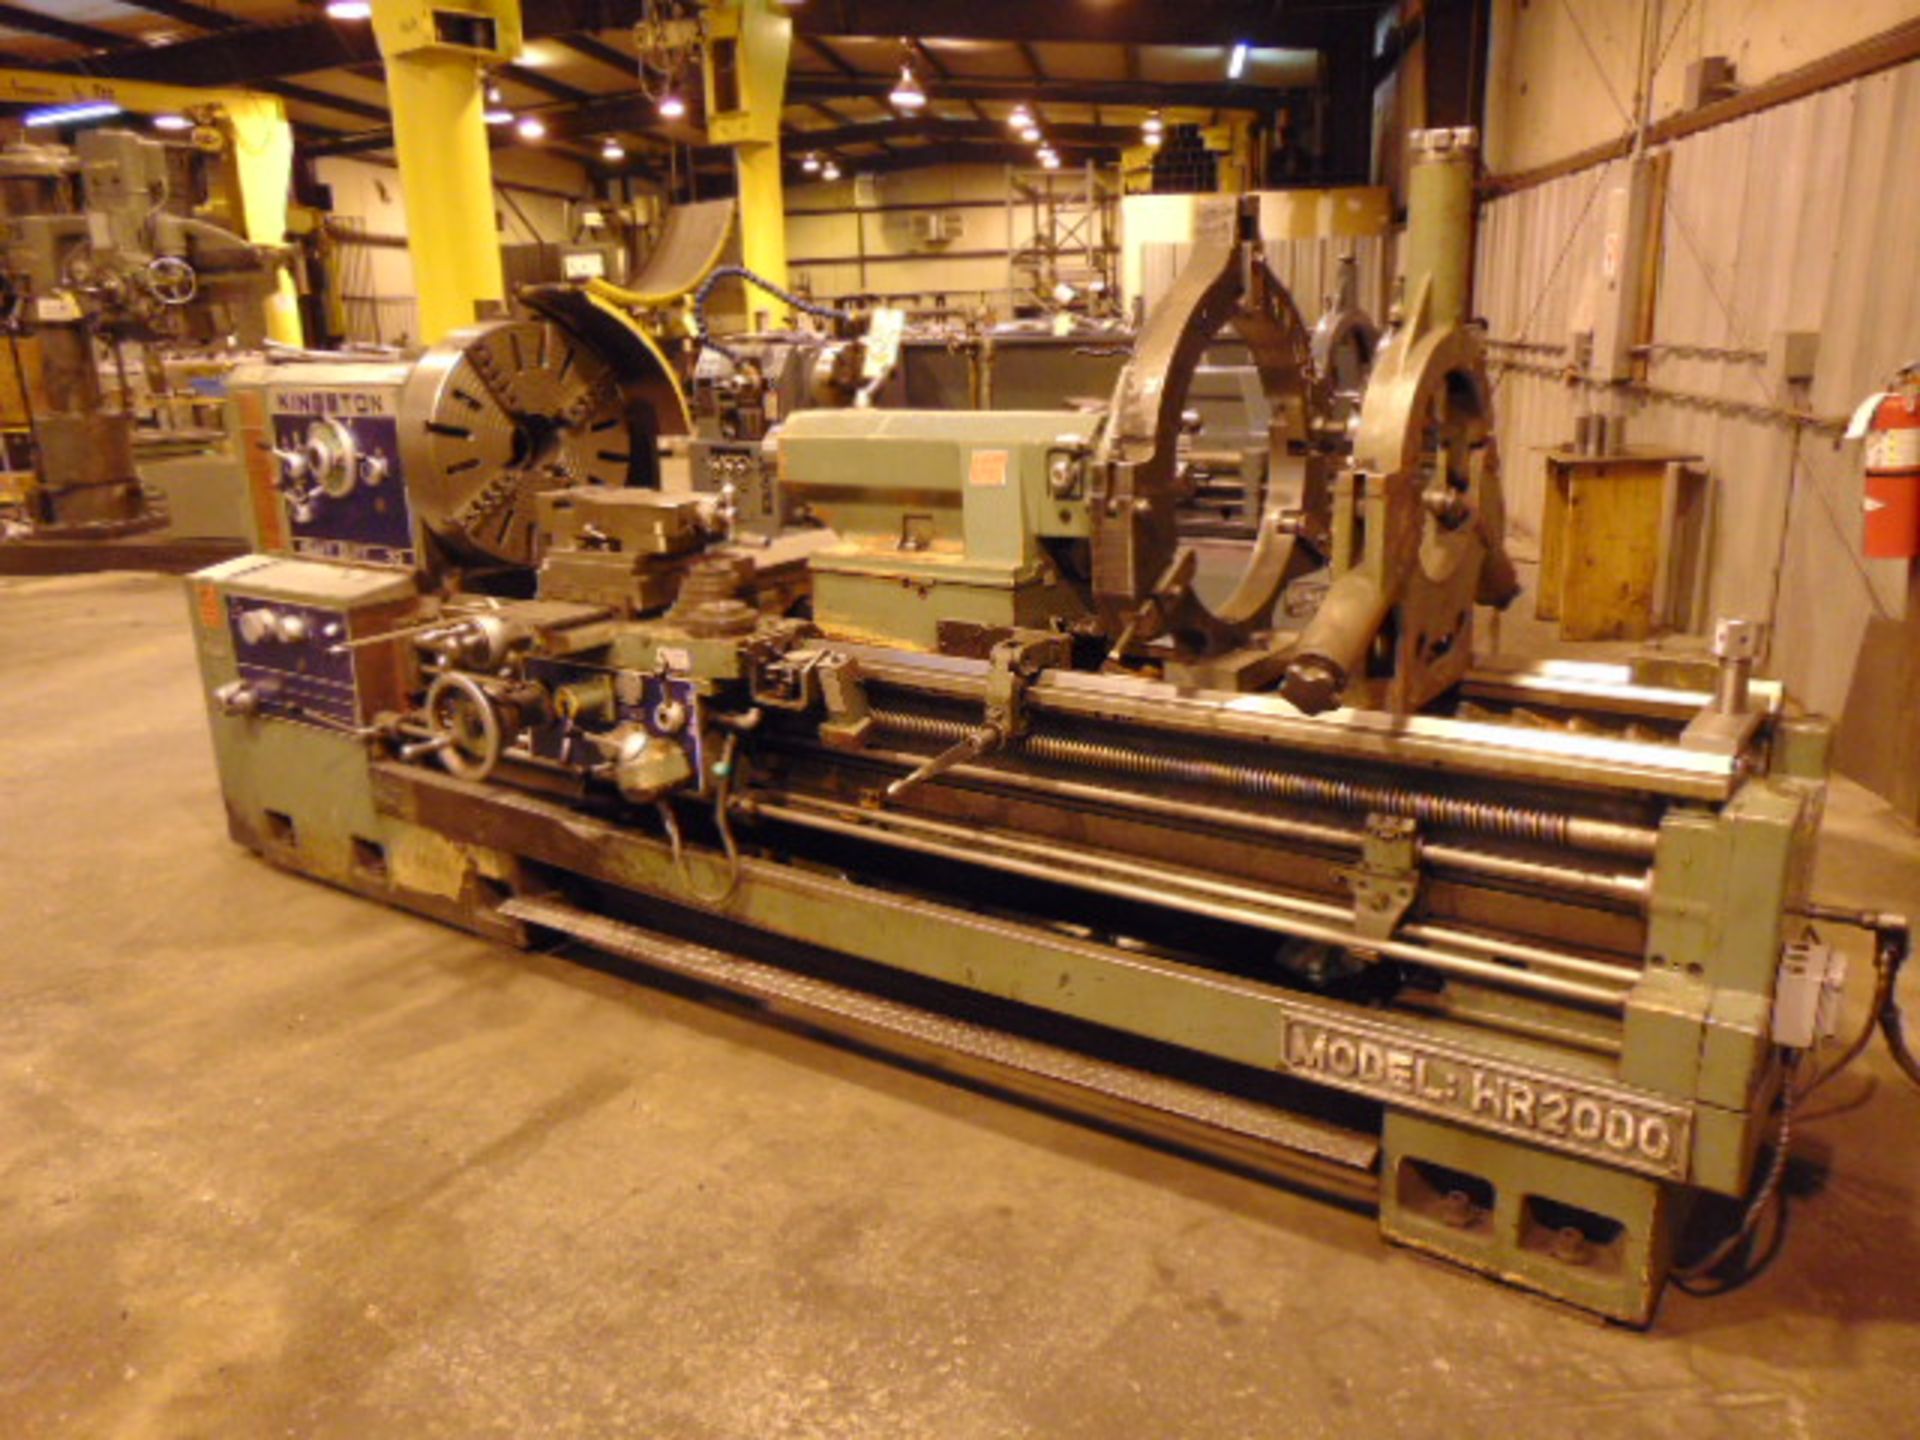 GAP BED ENGINE LATHE, KINGSTON 30” X 80” MDL. HR2000 HEAVY DUTY, new 1996, 24-3/4” dia. 4-jaw chuck, - Image 2 of 17